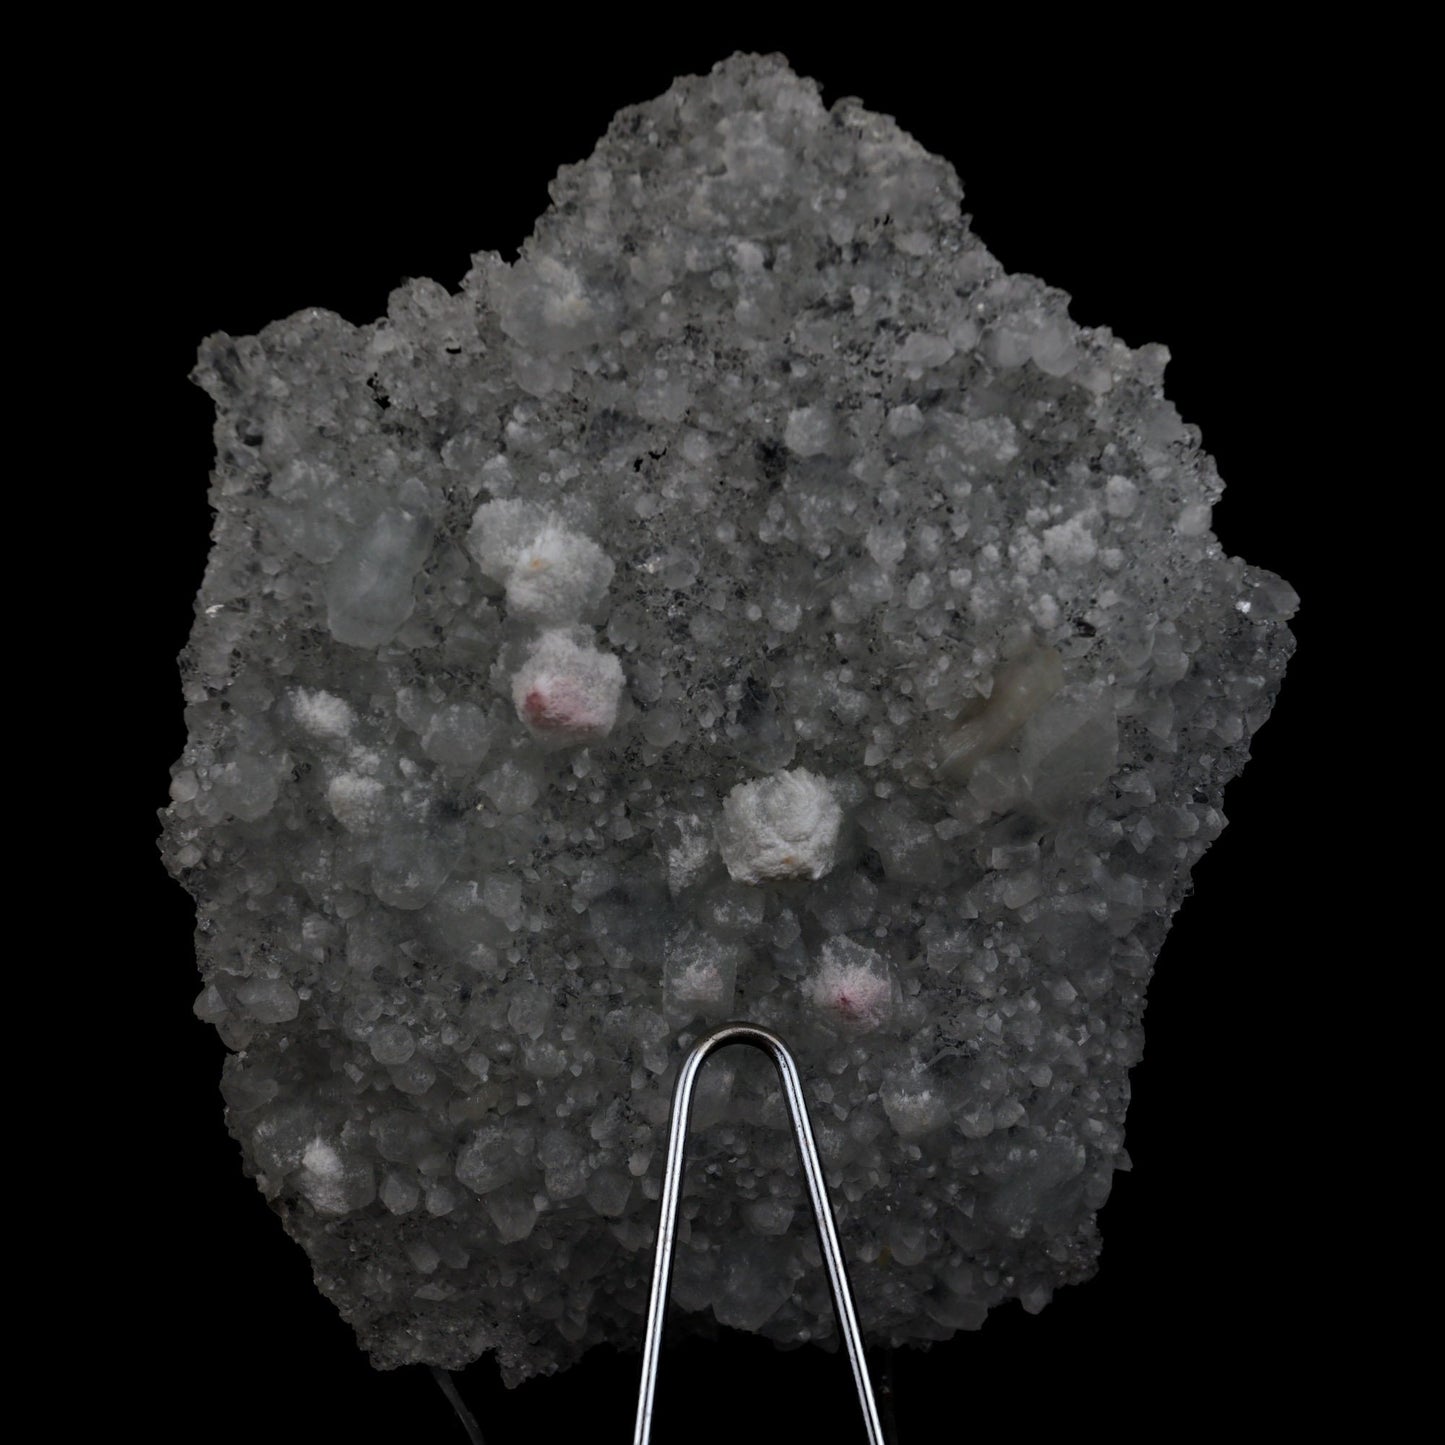 Gemmy Apophyllite Slice Natural Mineral Specimen # B 4731  https://www.superbminerals.us/products/gemmy-apophyllite-slice-natural-mineral-specimen-b-4731  Features: Exceptional glistening gemmy Apophyllite is a very thin and fragile slice of rock. Primary Mineral(s): ApophylliteSecondary Mineral(s): N/AMatrix: N/A9.00 Inch x 6.3 Inch Weight : 600 gms Locality: Nashik, Maharashtra, India